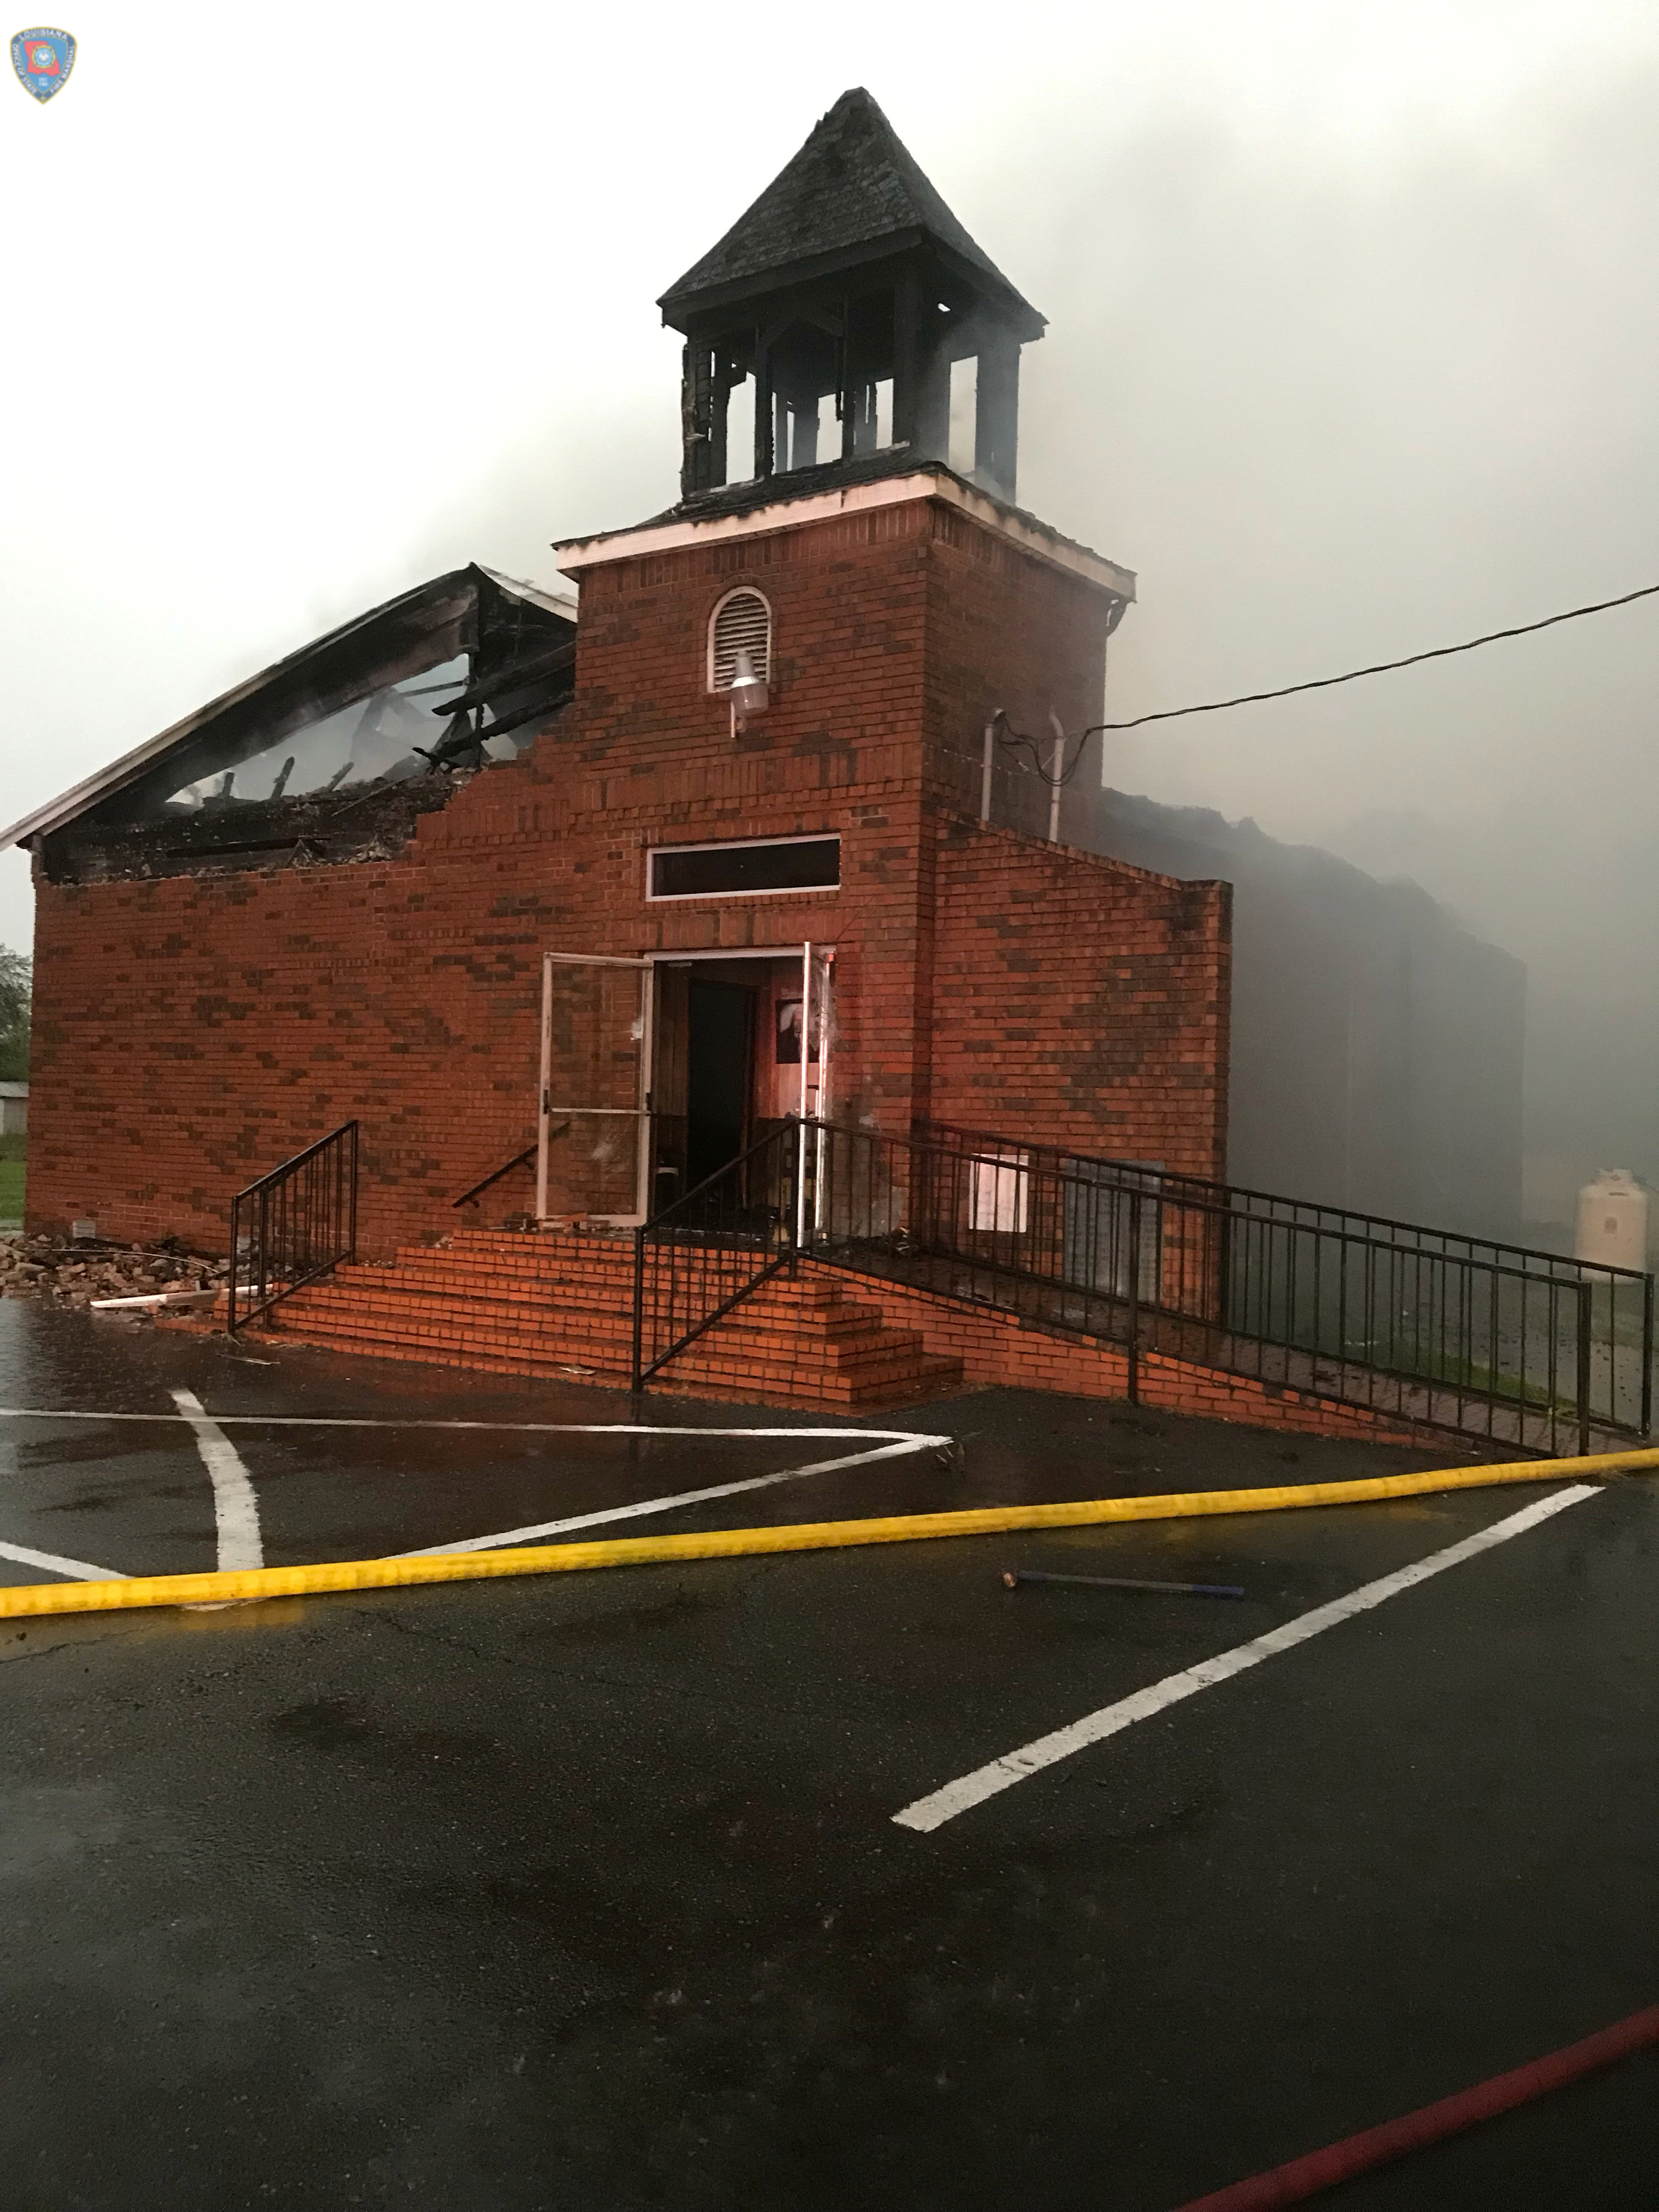 The Mount Pleasant Baptist Church in Opelousas, Louisiana, U.S. April 4, 2019 is pictured after a fire in this picture obtained from social media. Picture taken April 4, 2019. Courtesy Louisiana Office Of State Fire Marshal/Handout via REUTERS